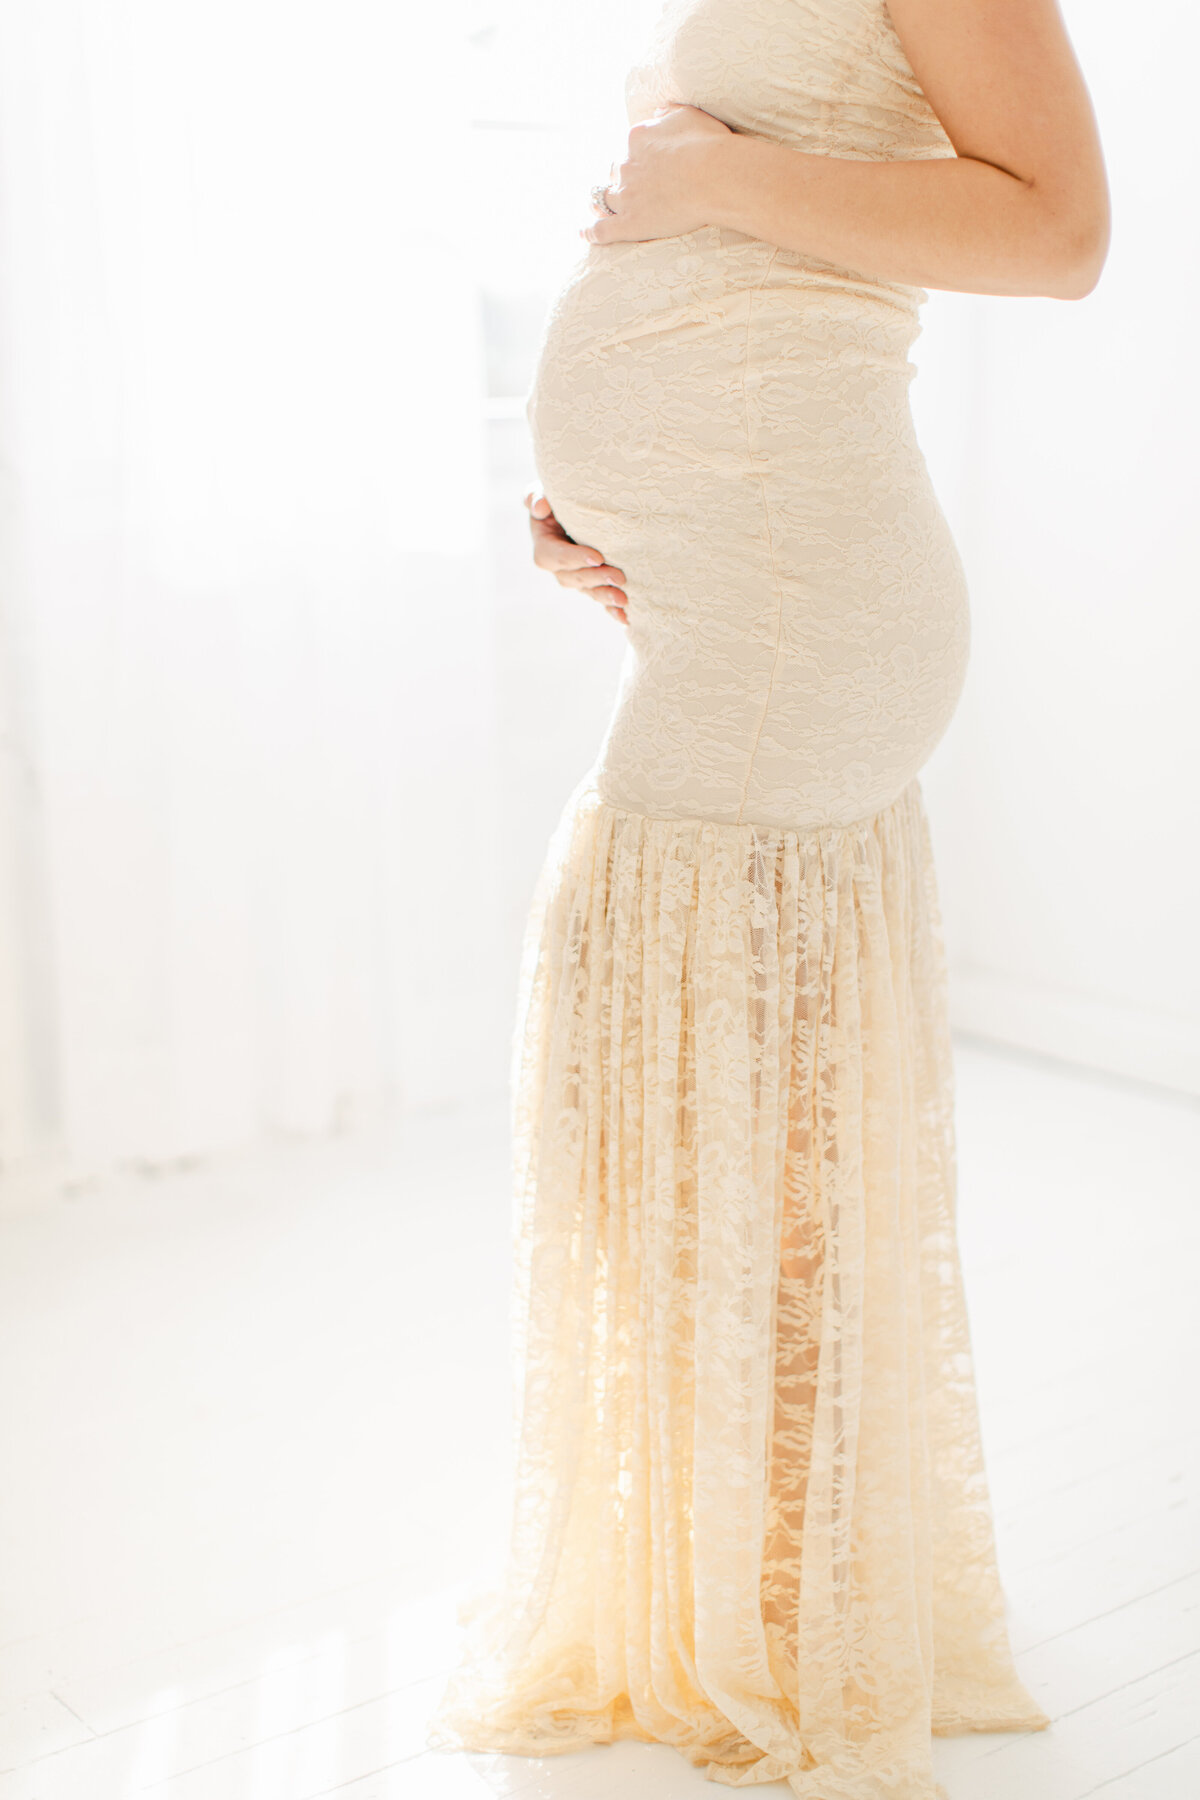 allie-ryann-photography-tampa-maternity-client-closet-10